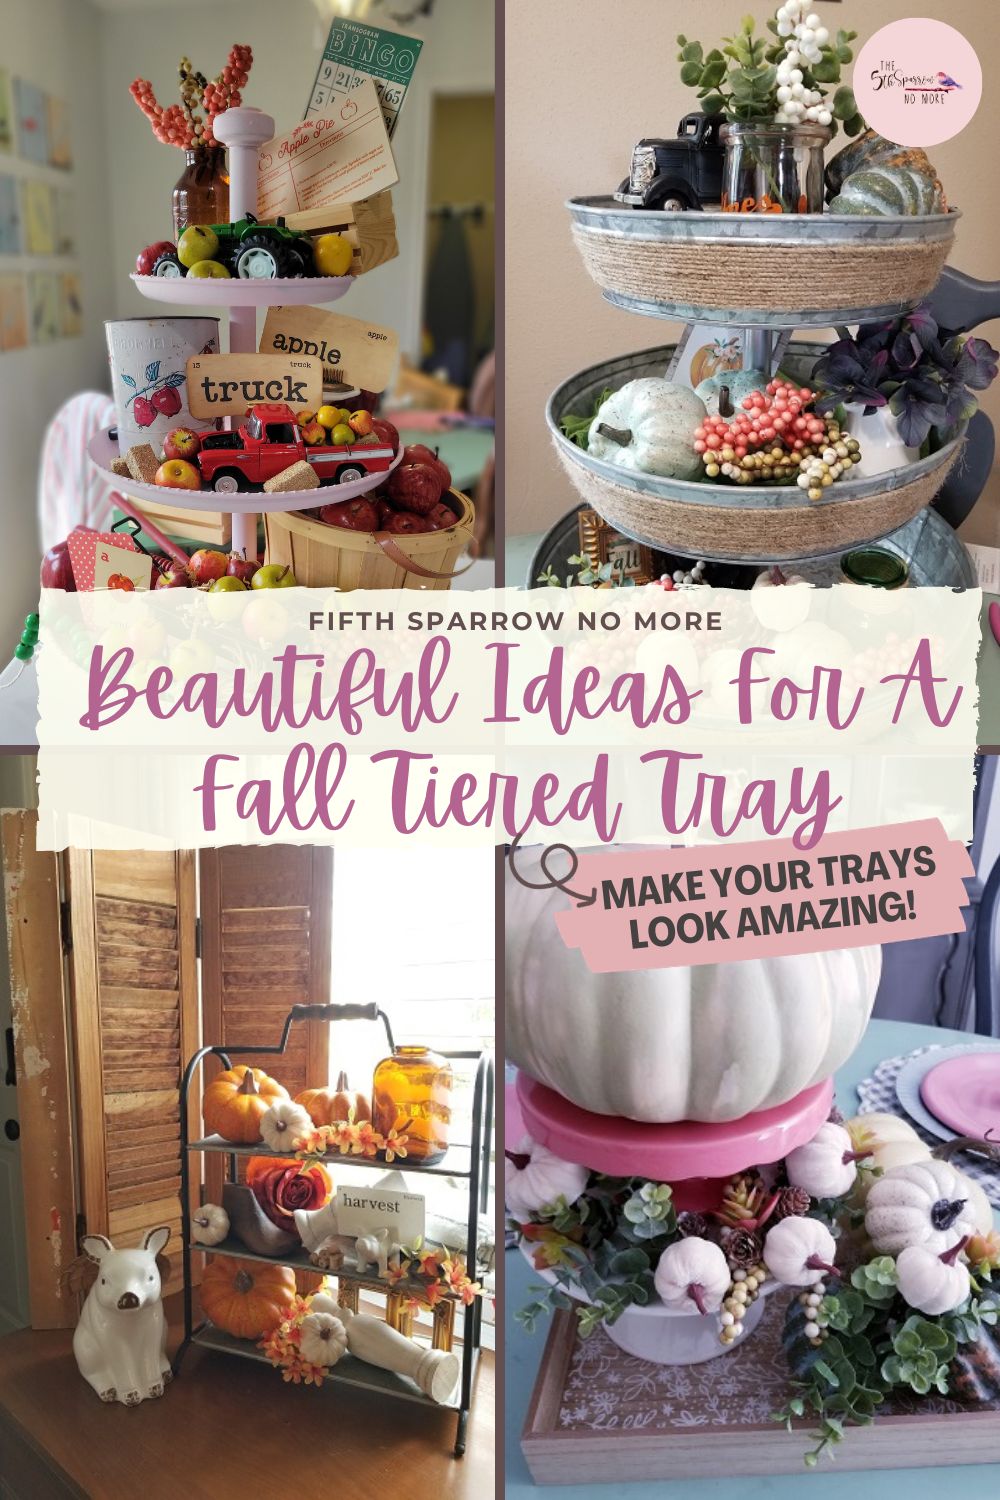 The best way to decorate a fall tiered tray is with these easy ideas. These tips and tricks will make your tiered tray pleasing to the eye.